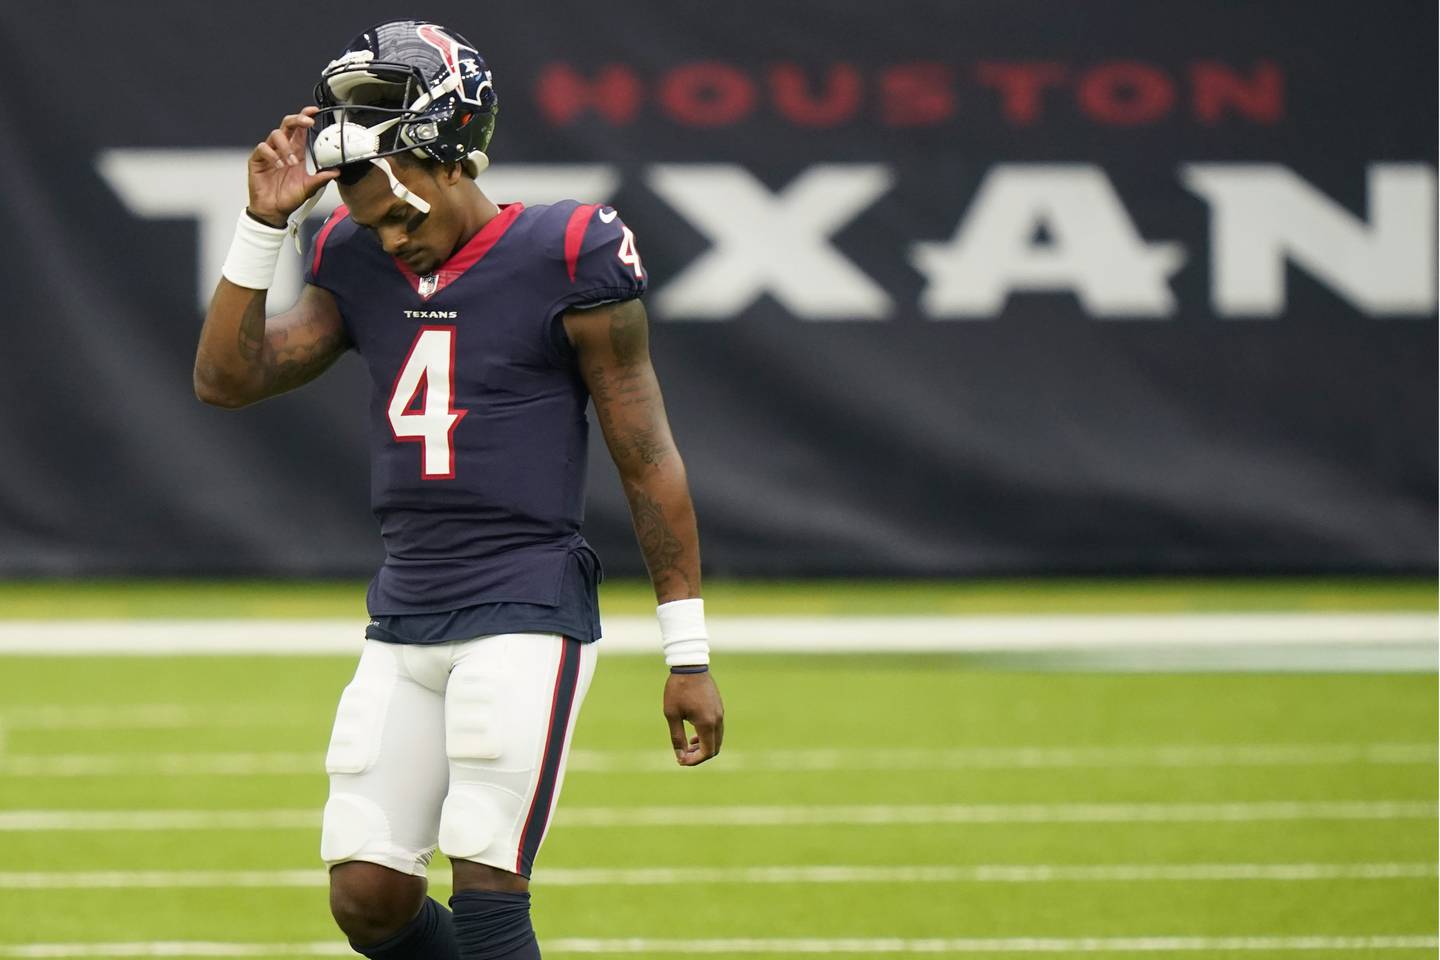 NFL suspends Deshaun Watson for 6 games after allegations of